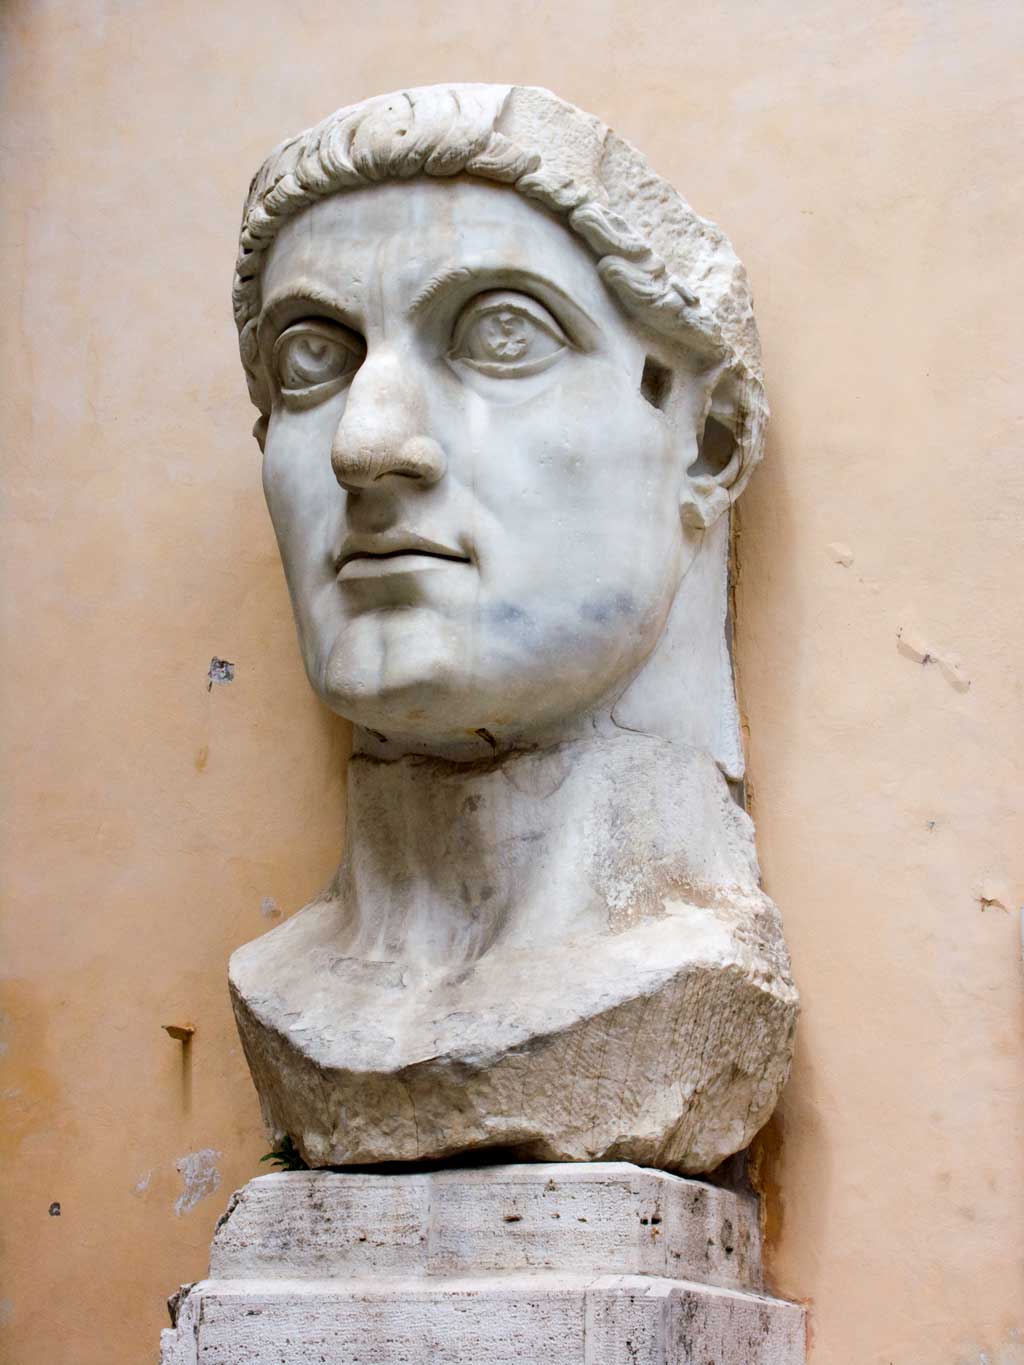 This is a photo of the head of the colossus of Constantine. The head is over eight feet tall and 6.5 feet long.